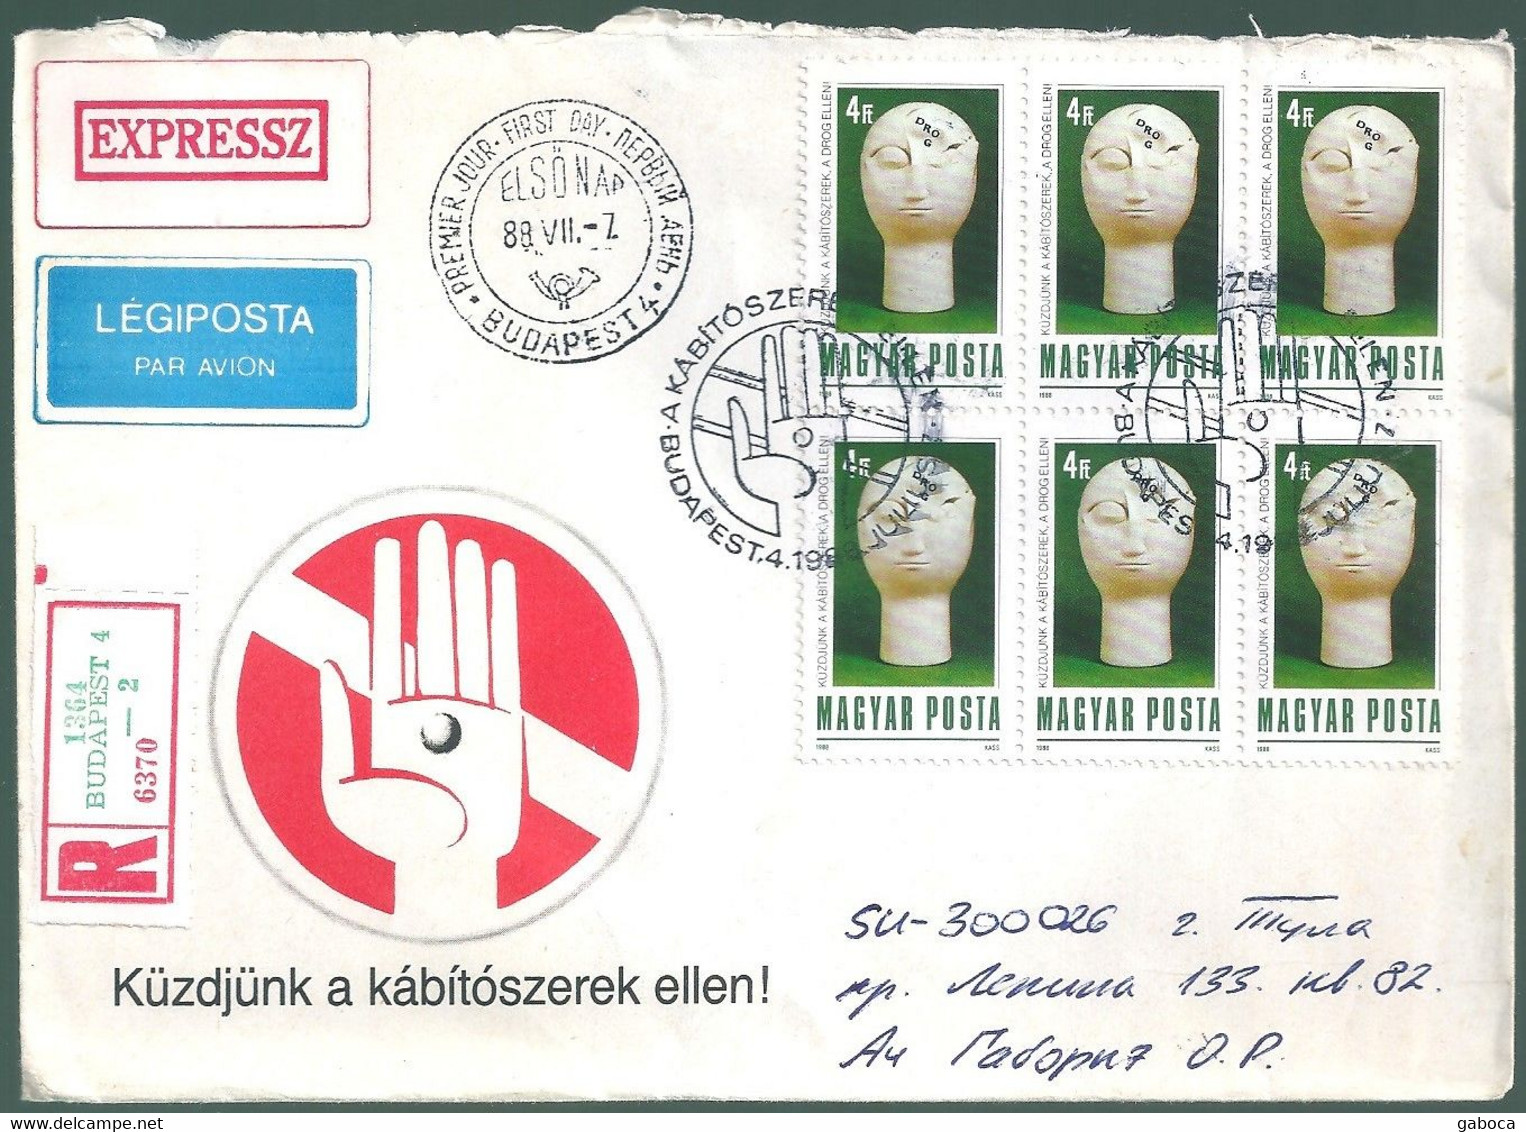 C2561 Hungary FDC Health Healthcare Addiction Drugs Registered+EXPRESS+Air Mail UNIQUE - Droga